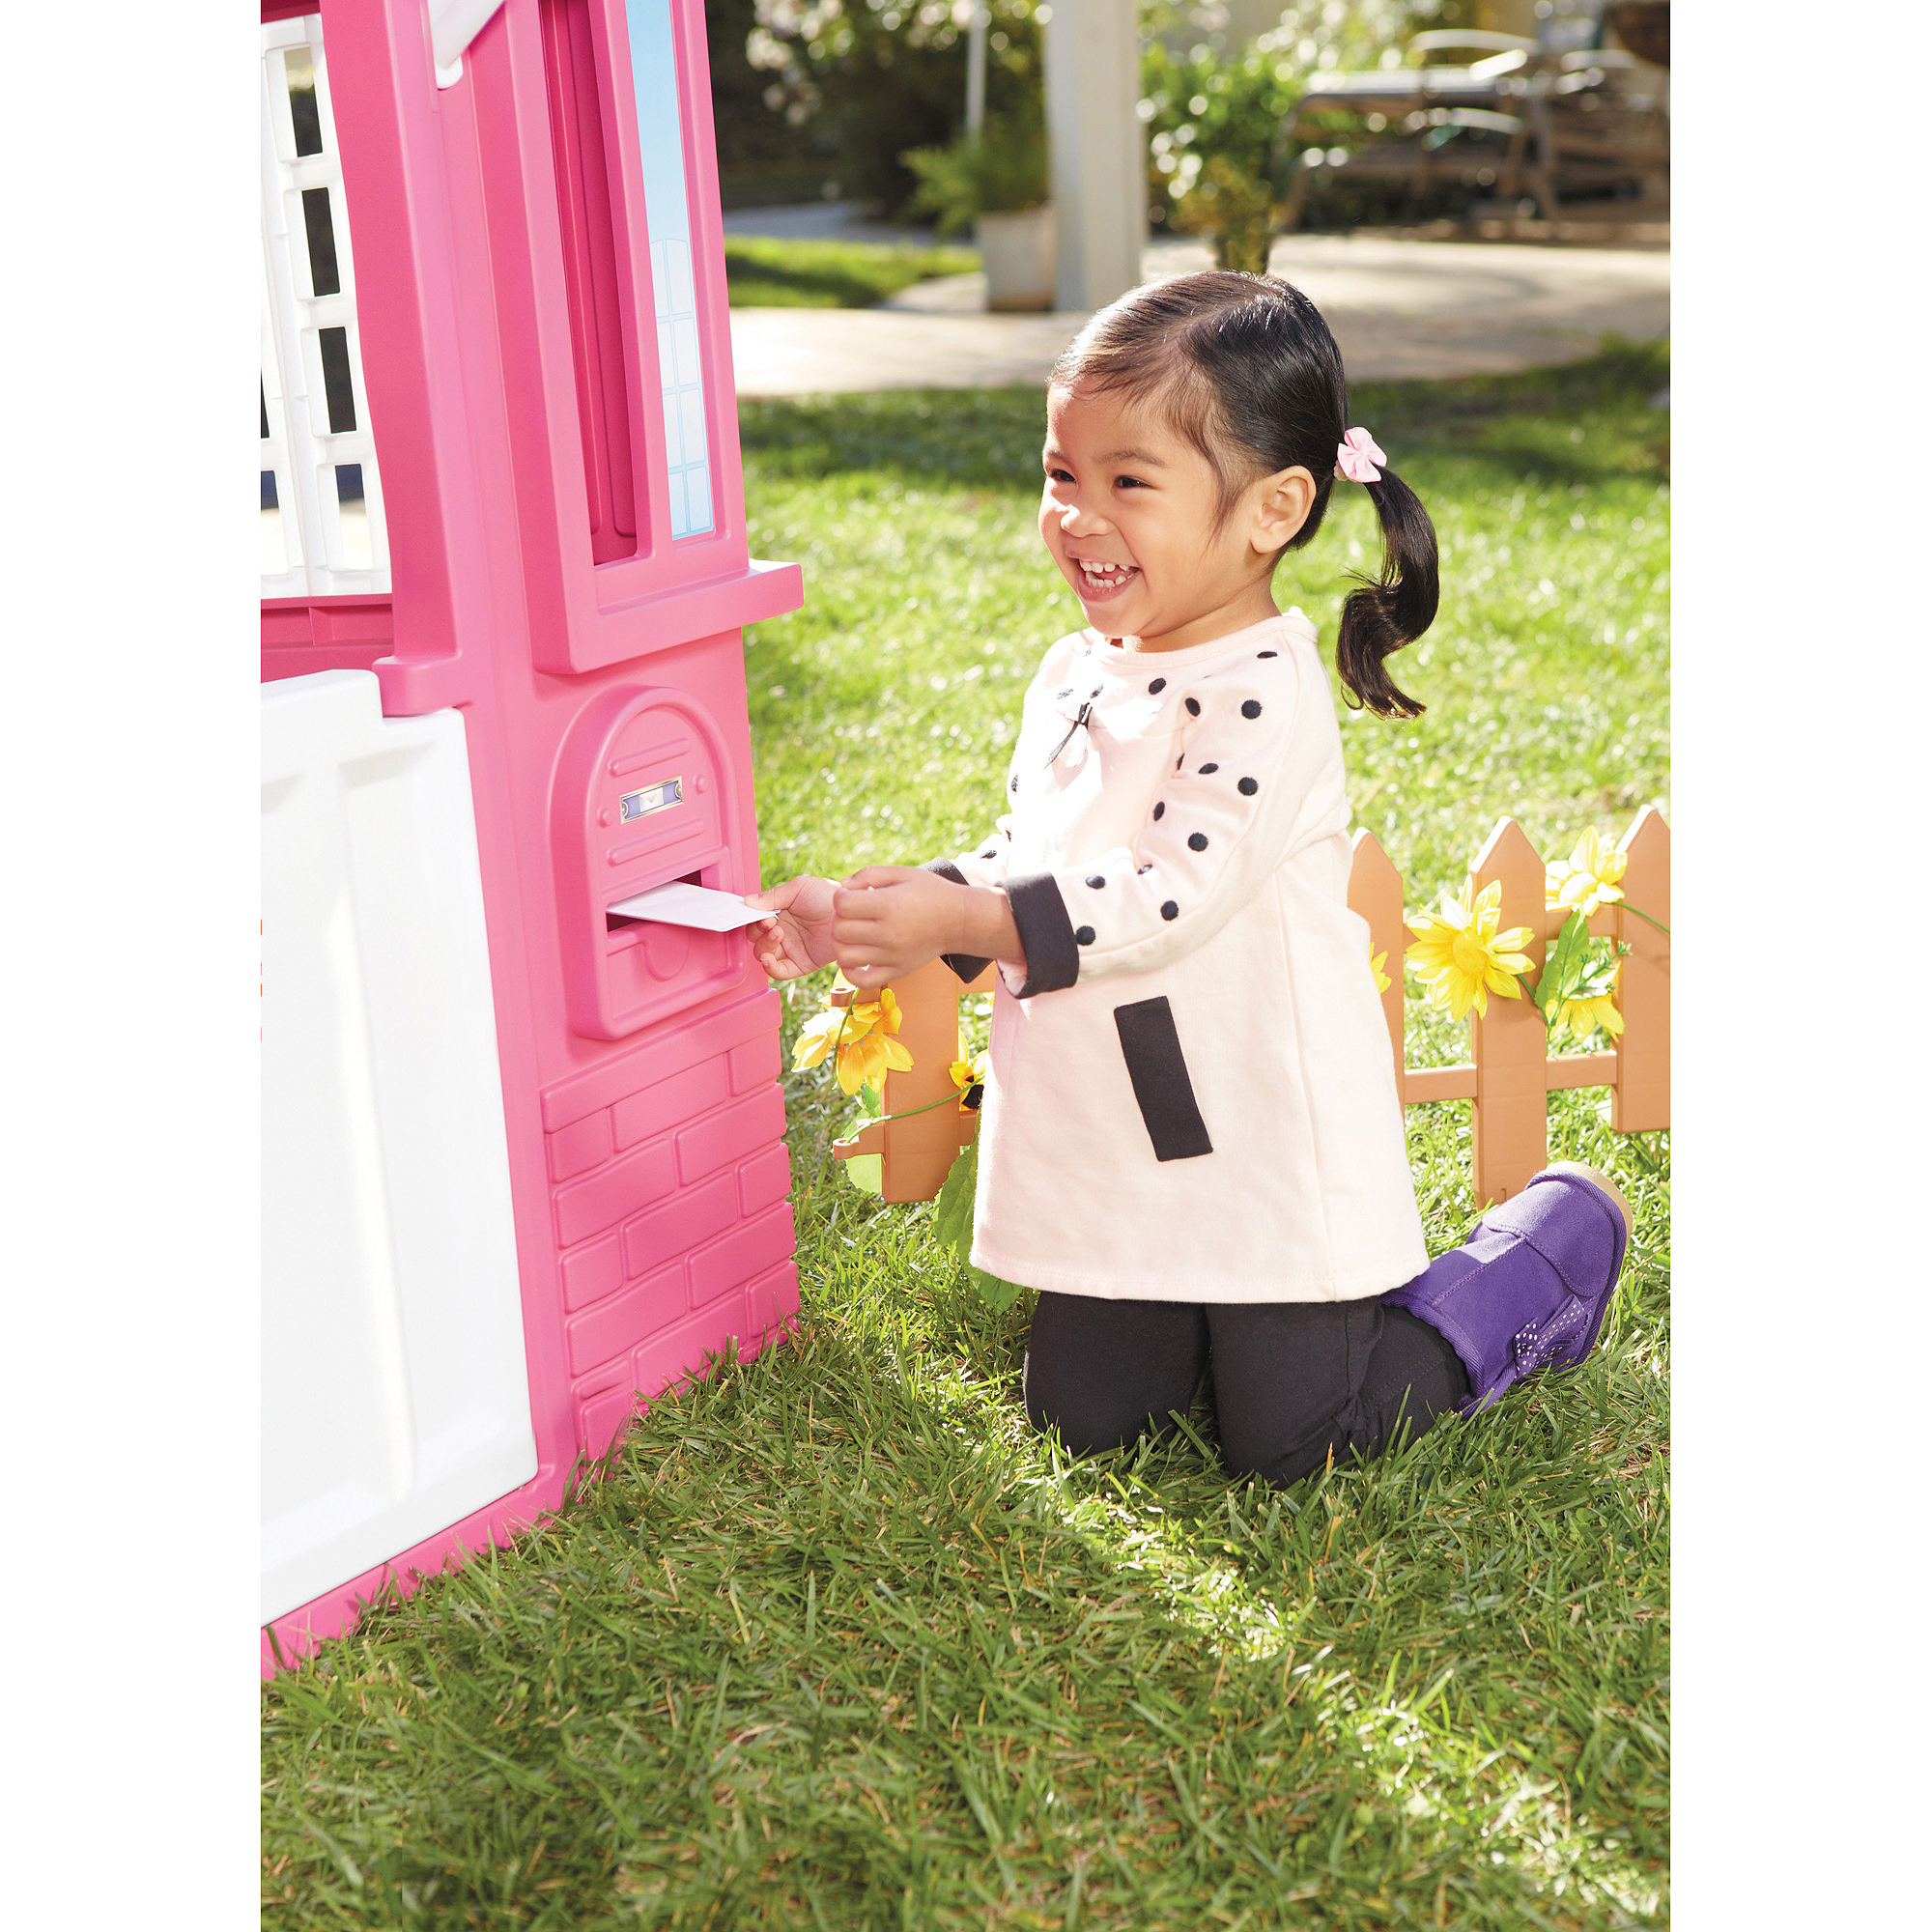 Little Tikes Cape Cottage Portable Indoor/Outdoor Backyard Playhouse House, Pink - image 5 of 6